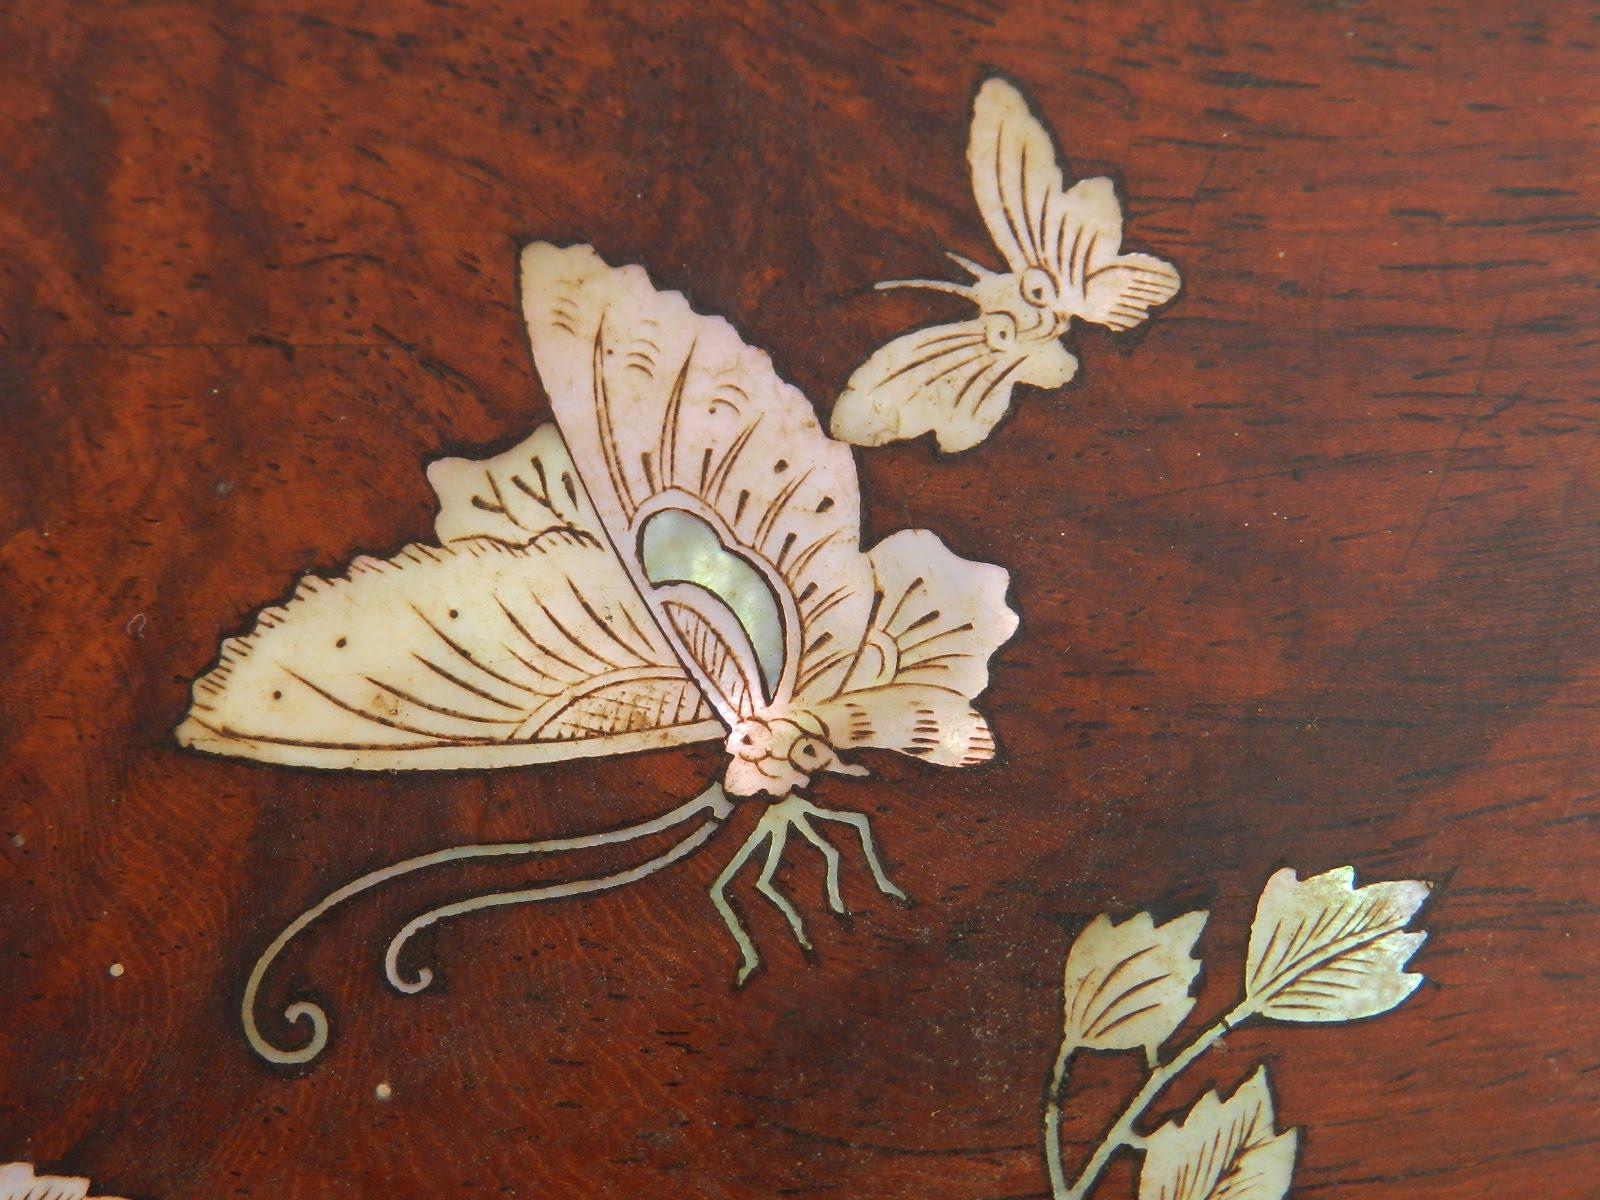 Oval Hardwood Tray Inlaid with M o Pearl Chinese late 19th Century
Chinoiserie incrusted Butterflies and Flowers
Please see Chinoiserie Center Piece Oval Inlaid Red Bowl late 19th Century that is listed separately
Some small losses to the mop not